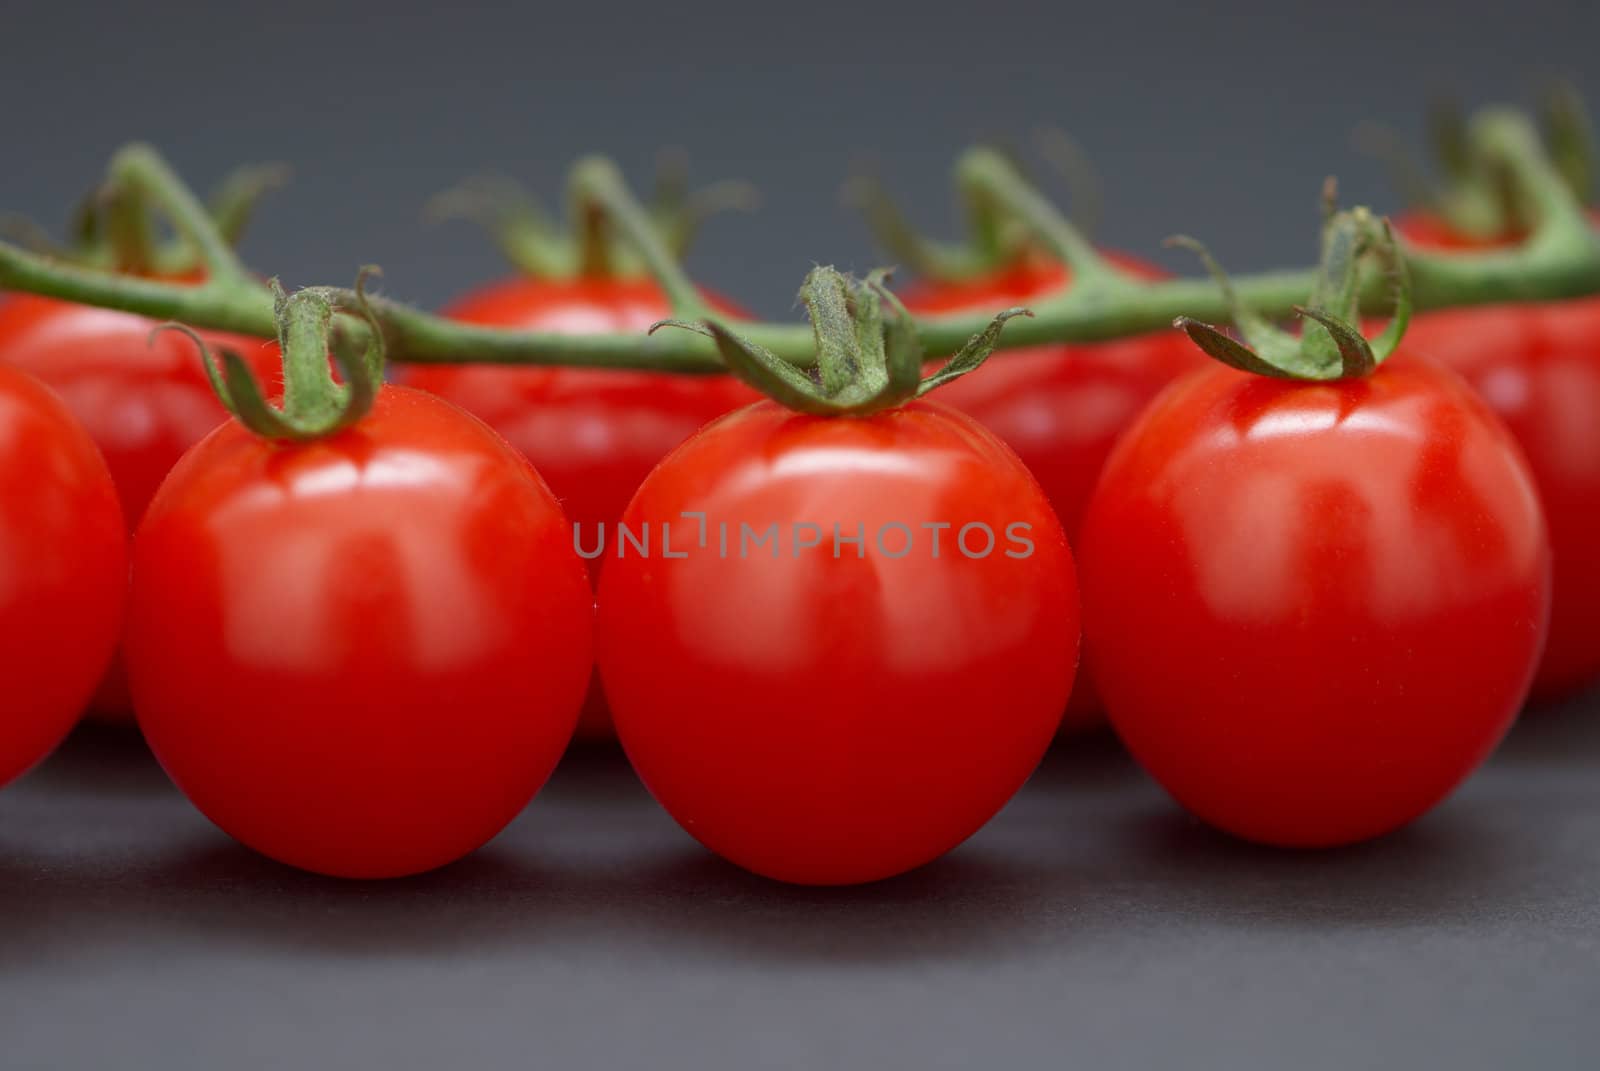 A branch of cherry tomatoes on a black background.